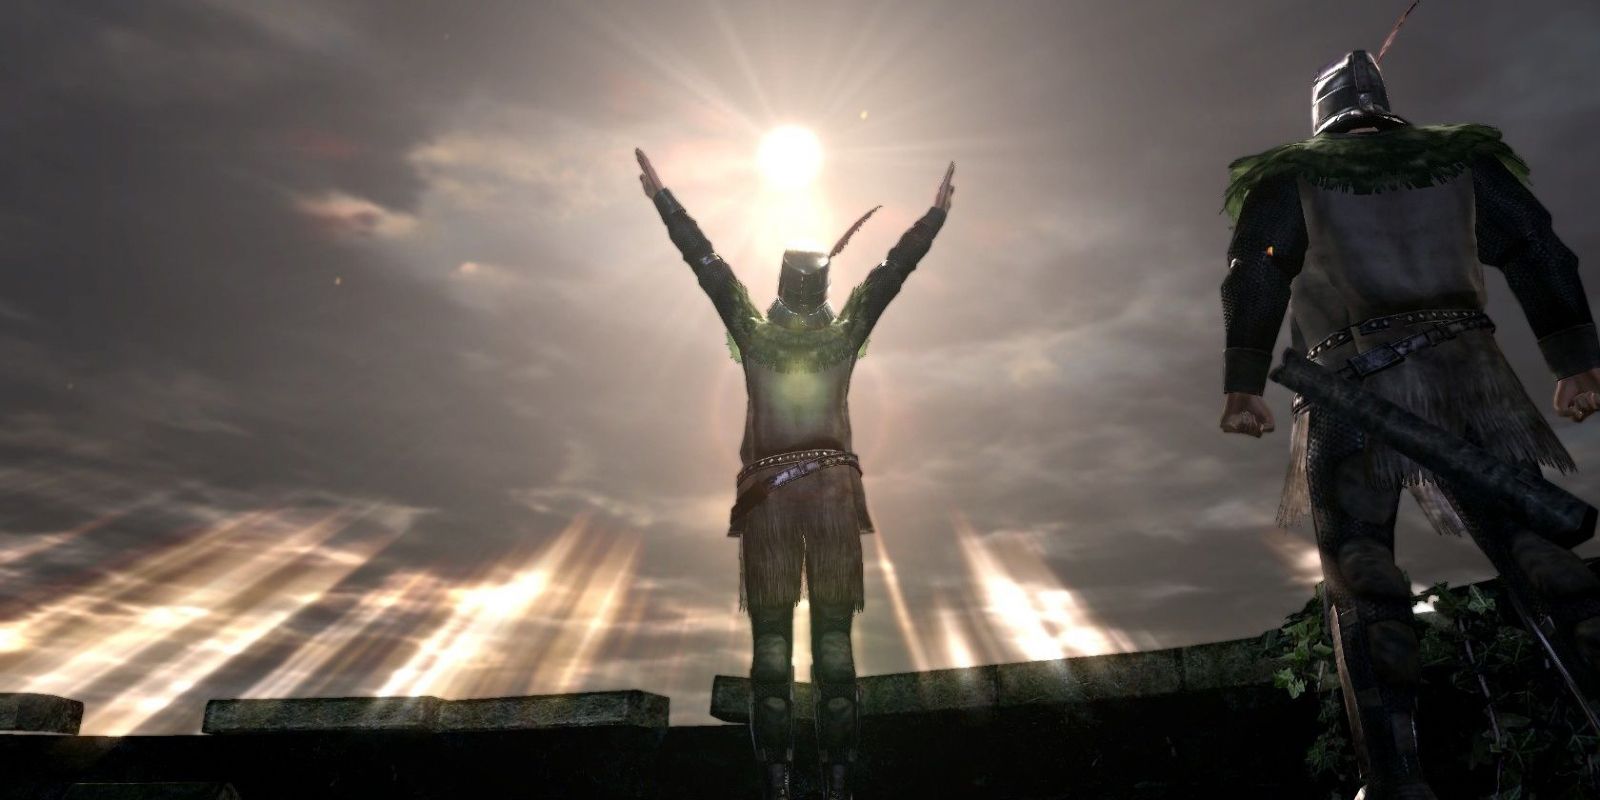 Solaire from Dark Souls is praising the sun while the protagonist looks on.